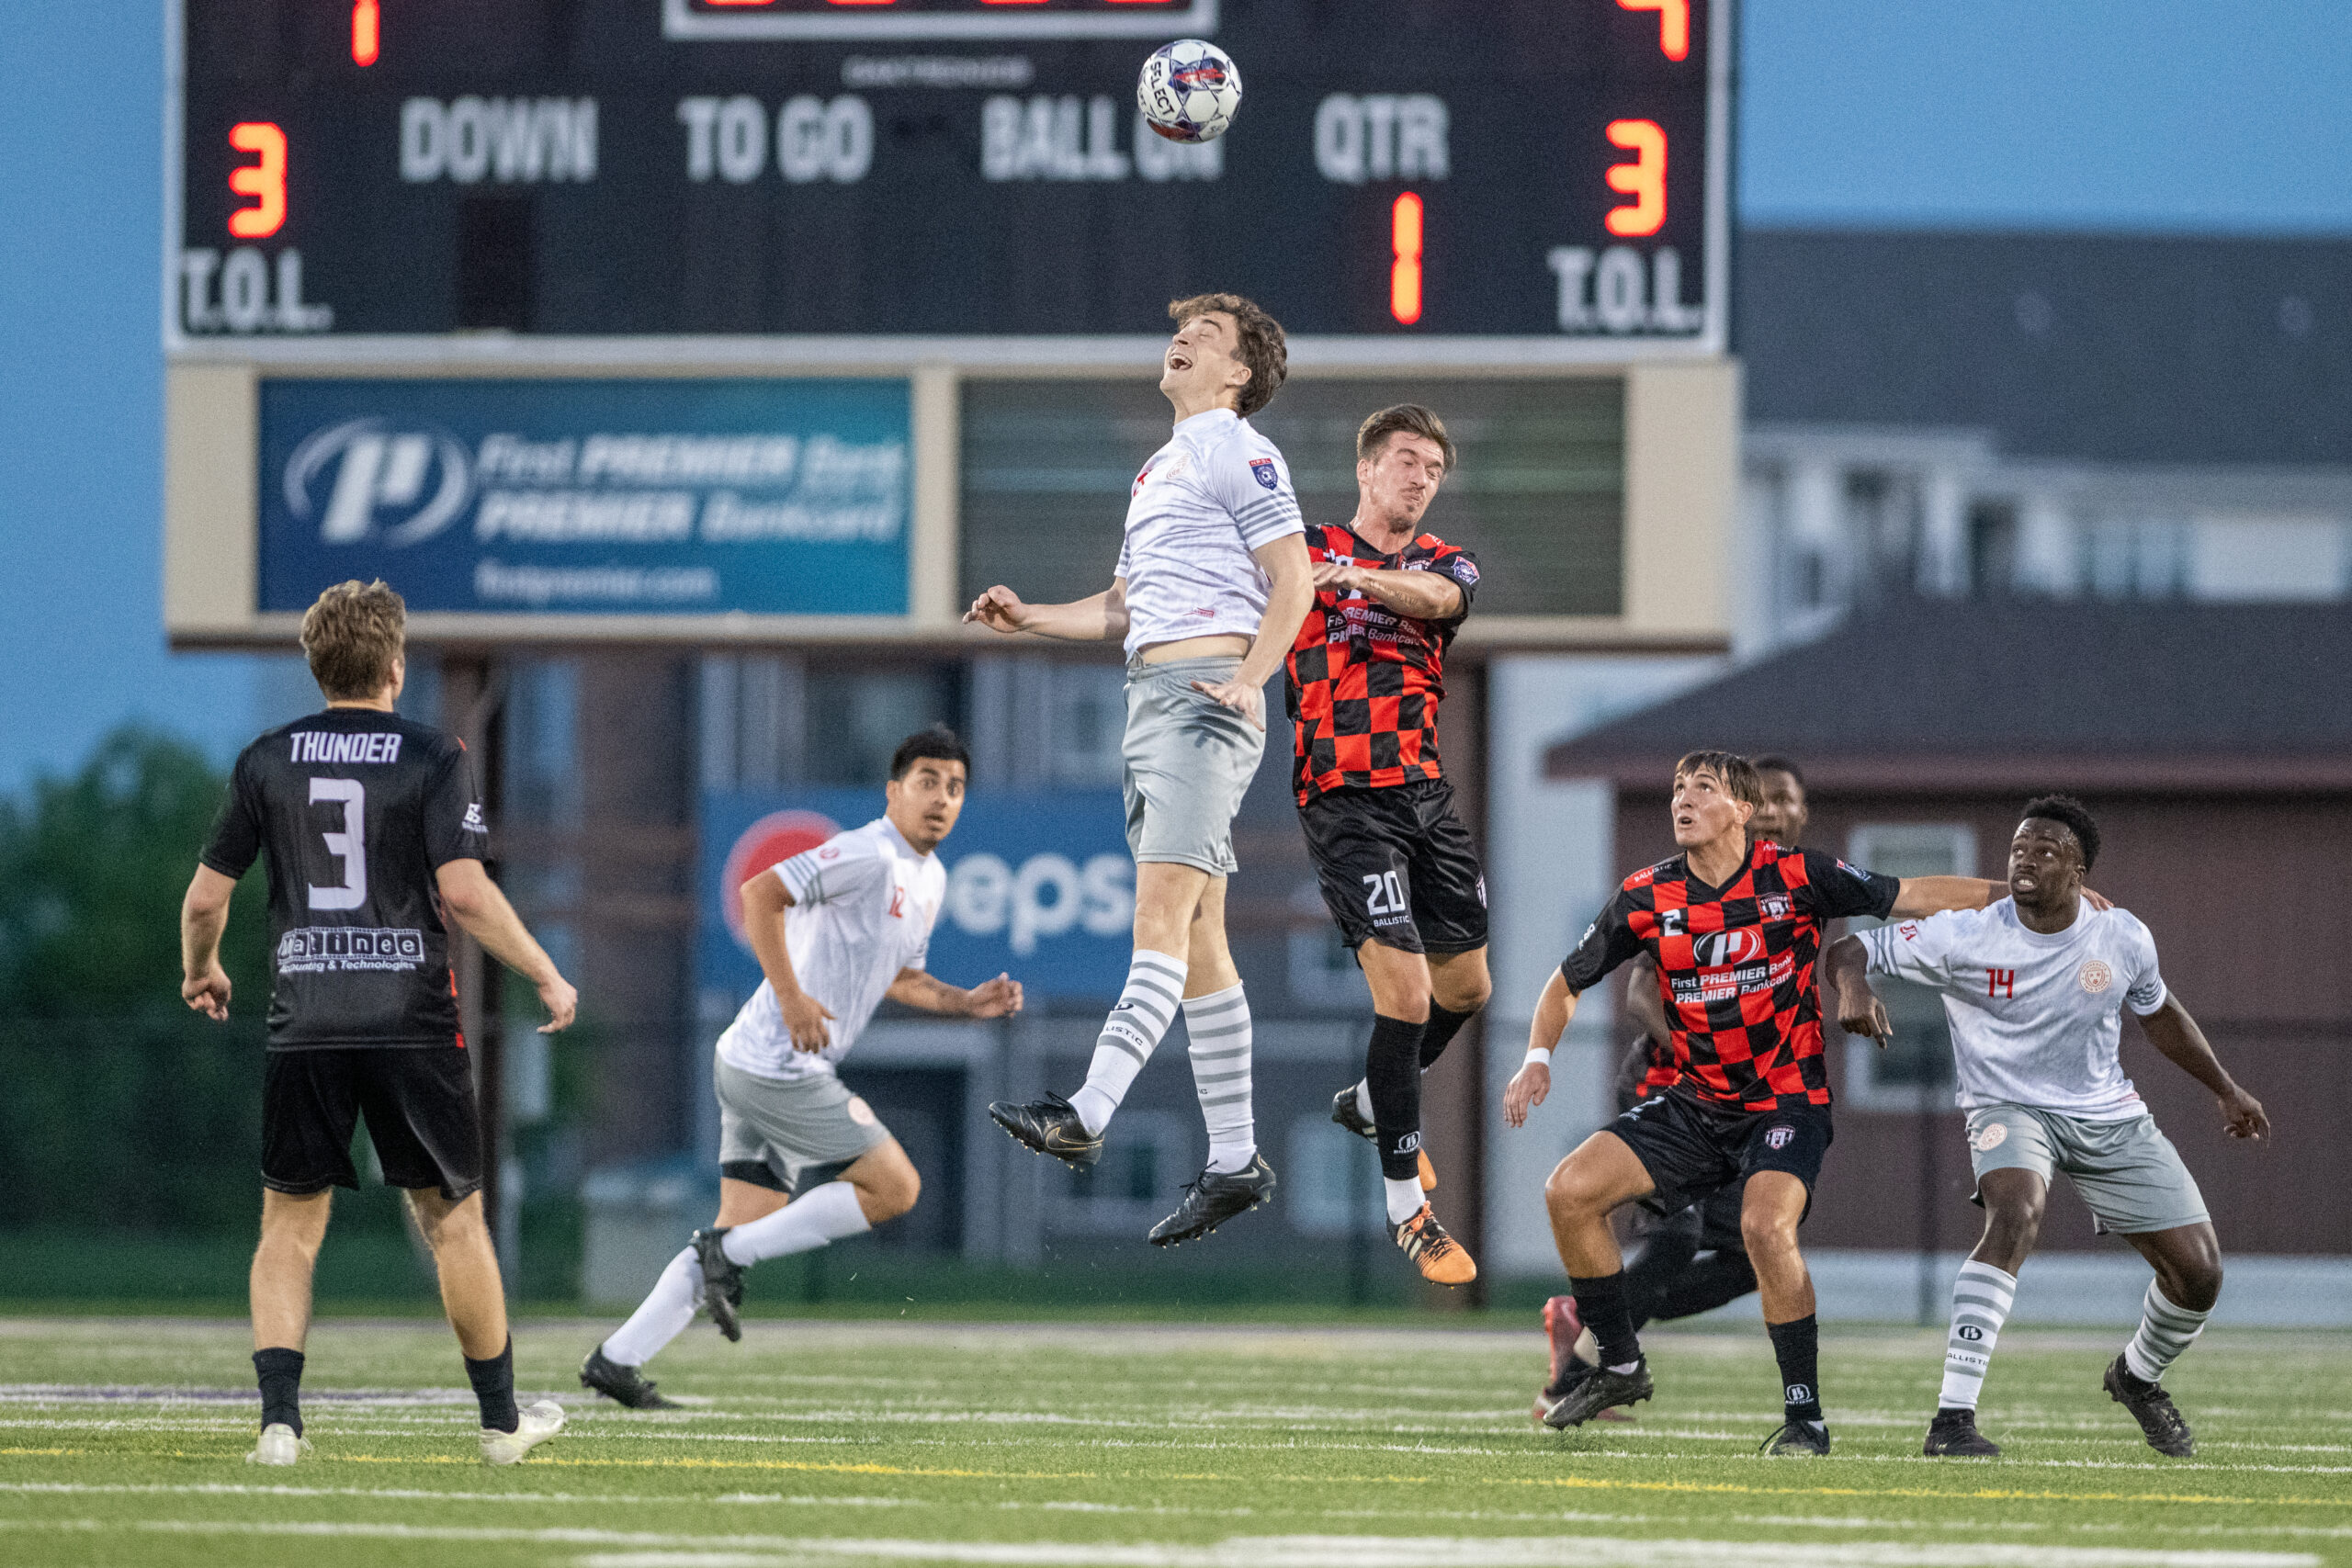 Players in all white and in red and black checked soccer kits are pictured in mid-air